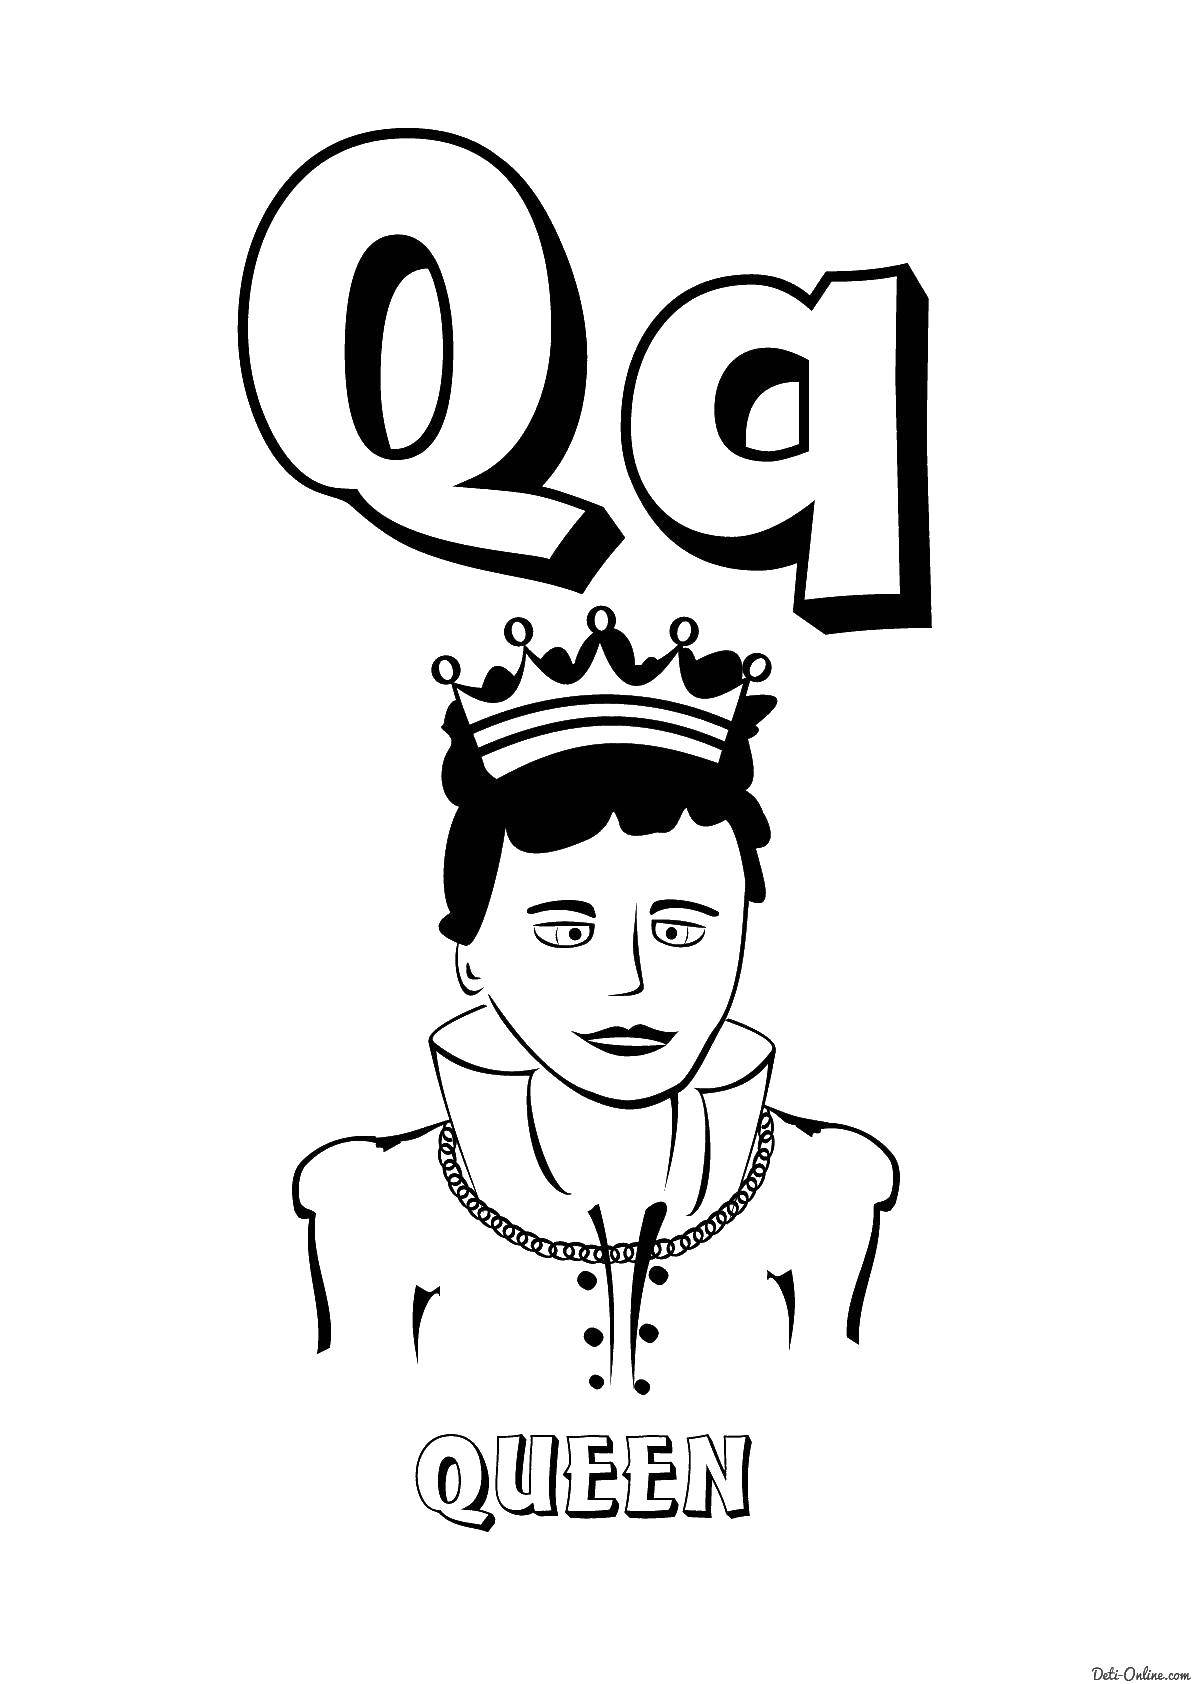 Coloring Letter q. Category English. Tags:  letter, Q, queen.